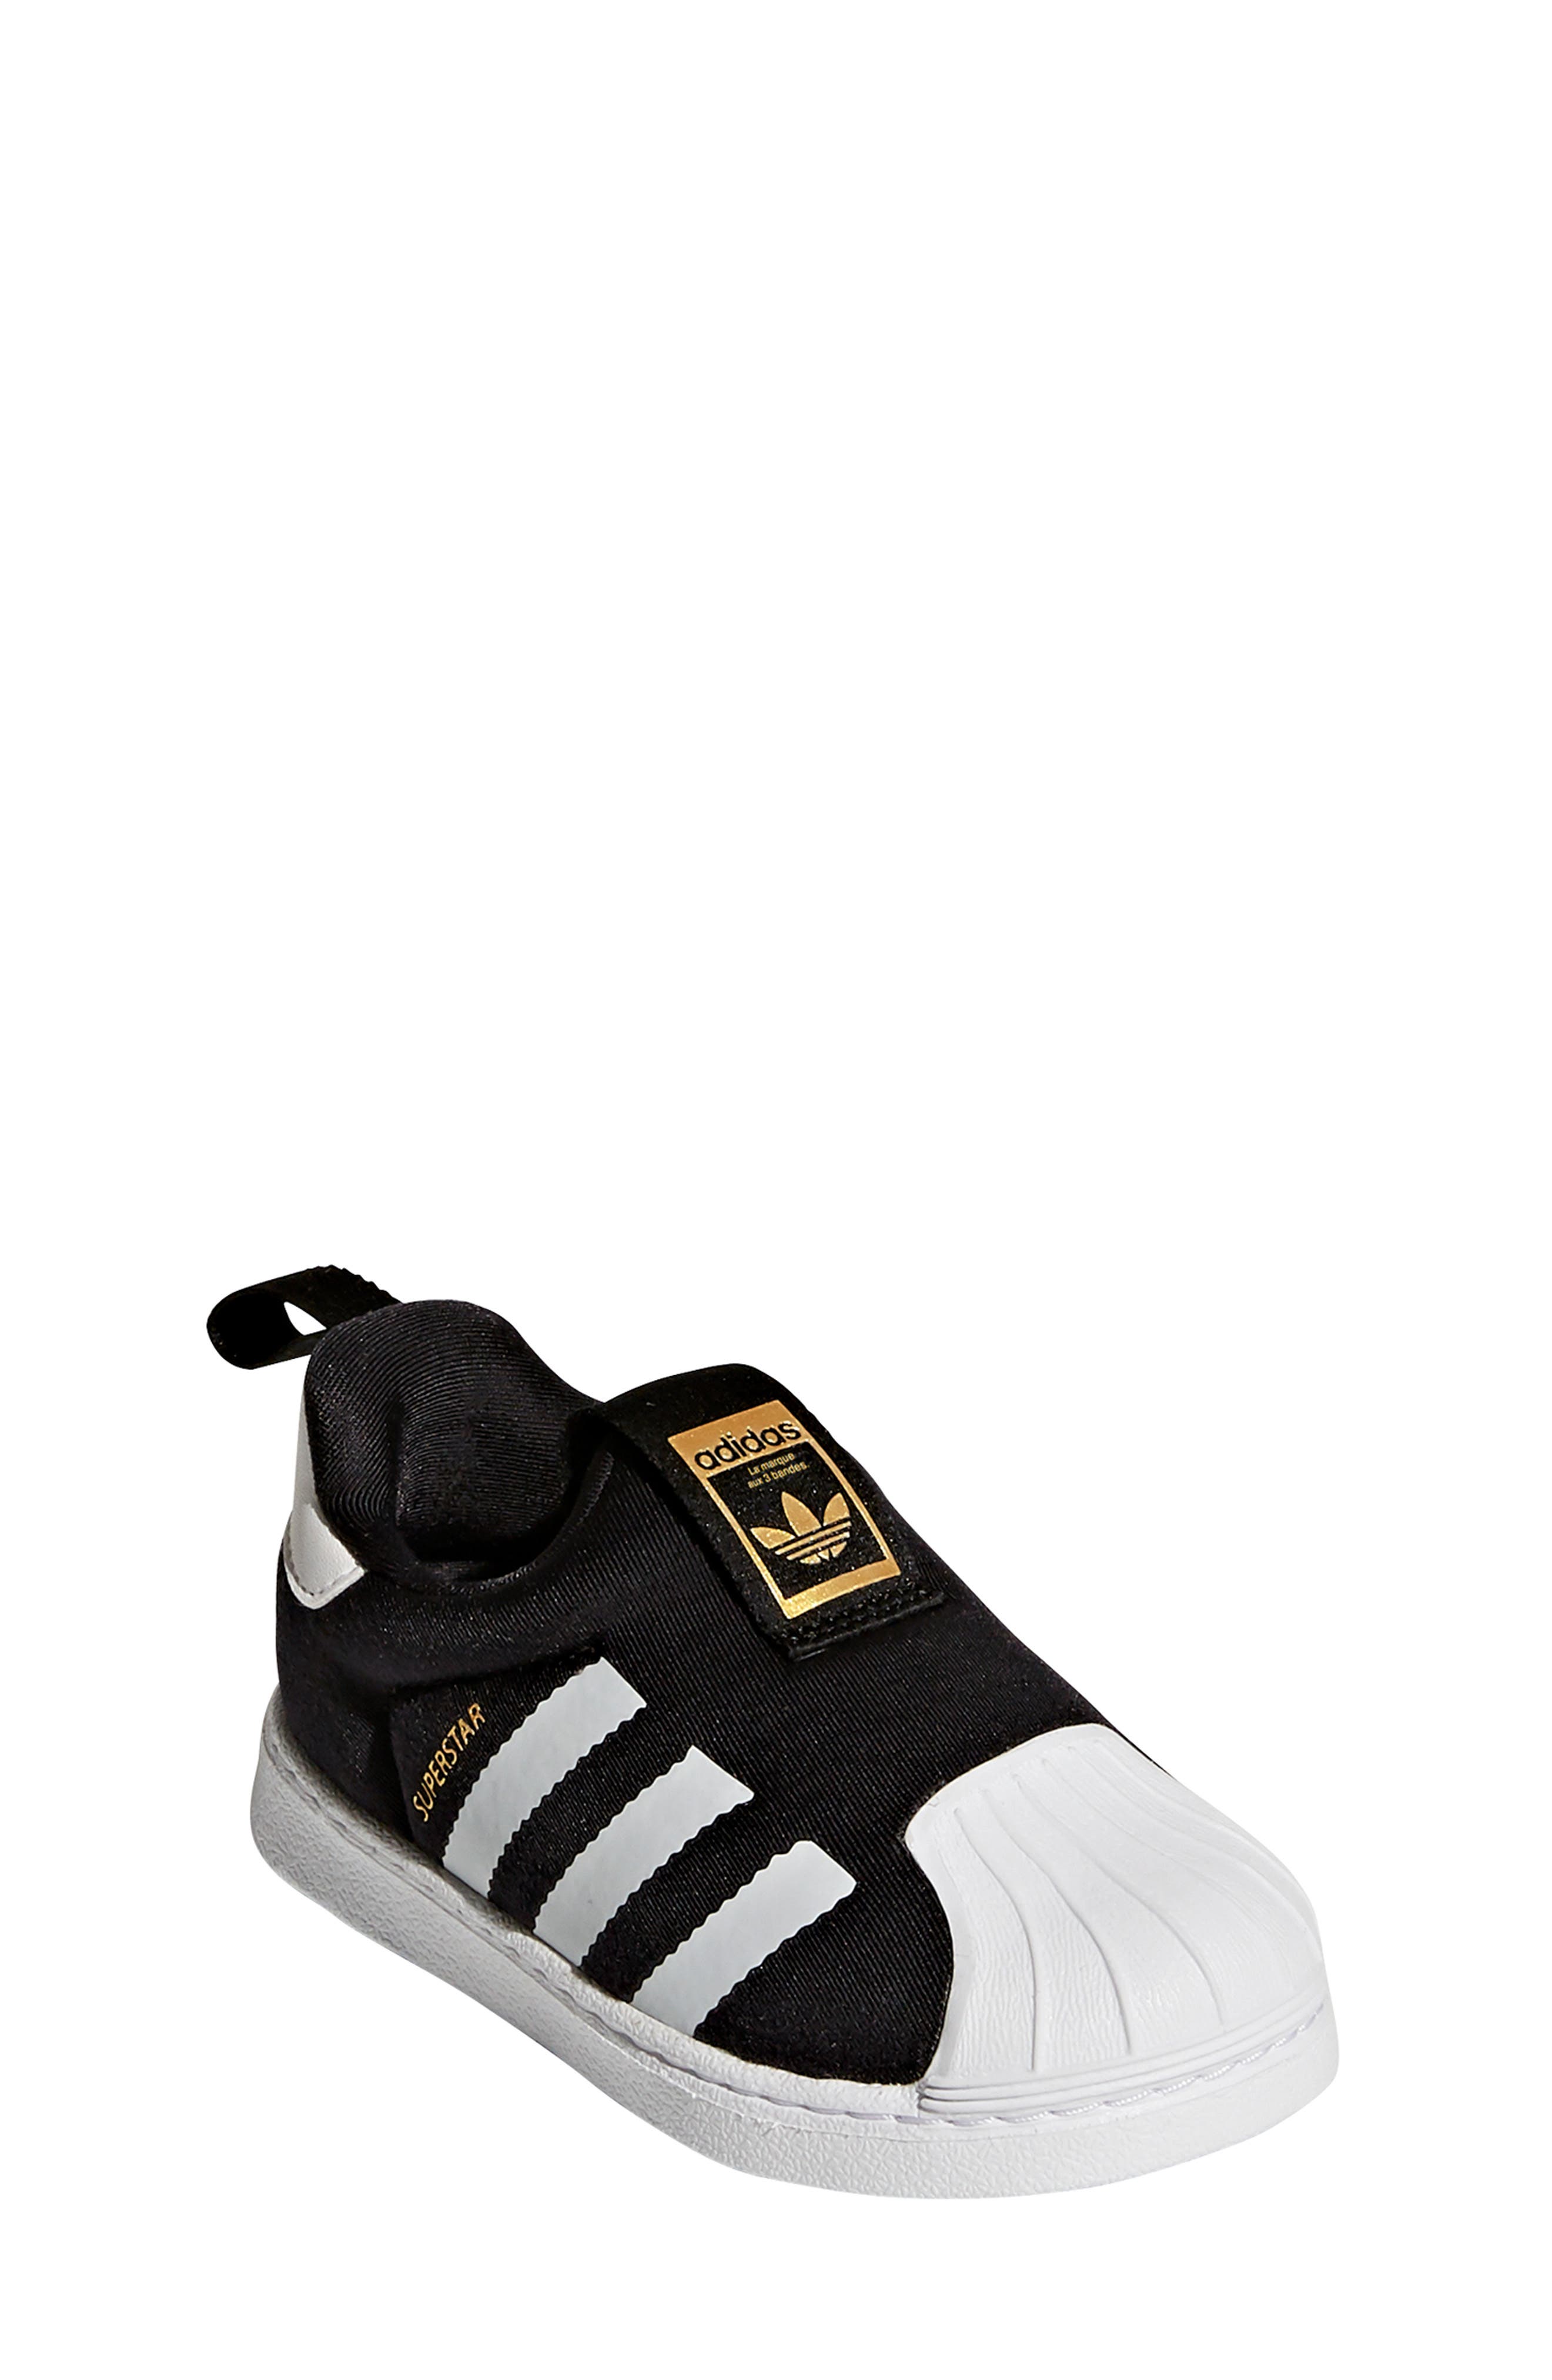 adidas sneakers for baby girl